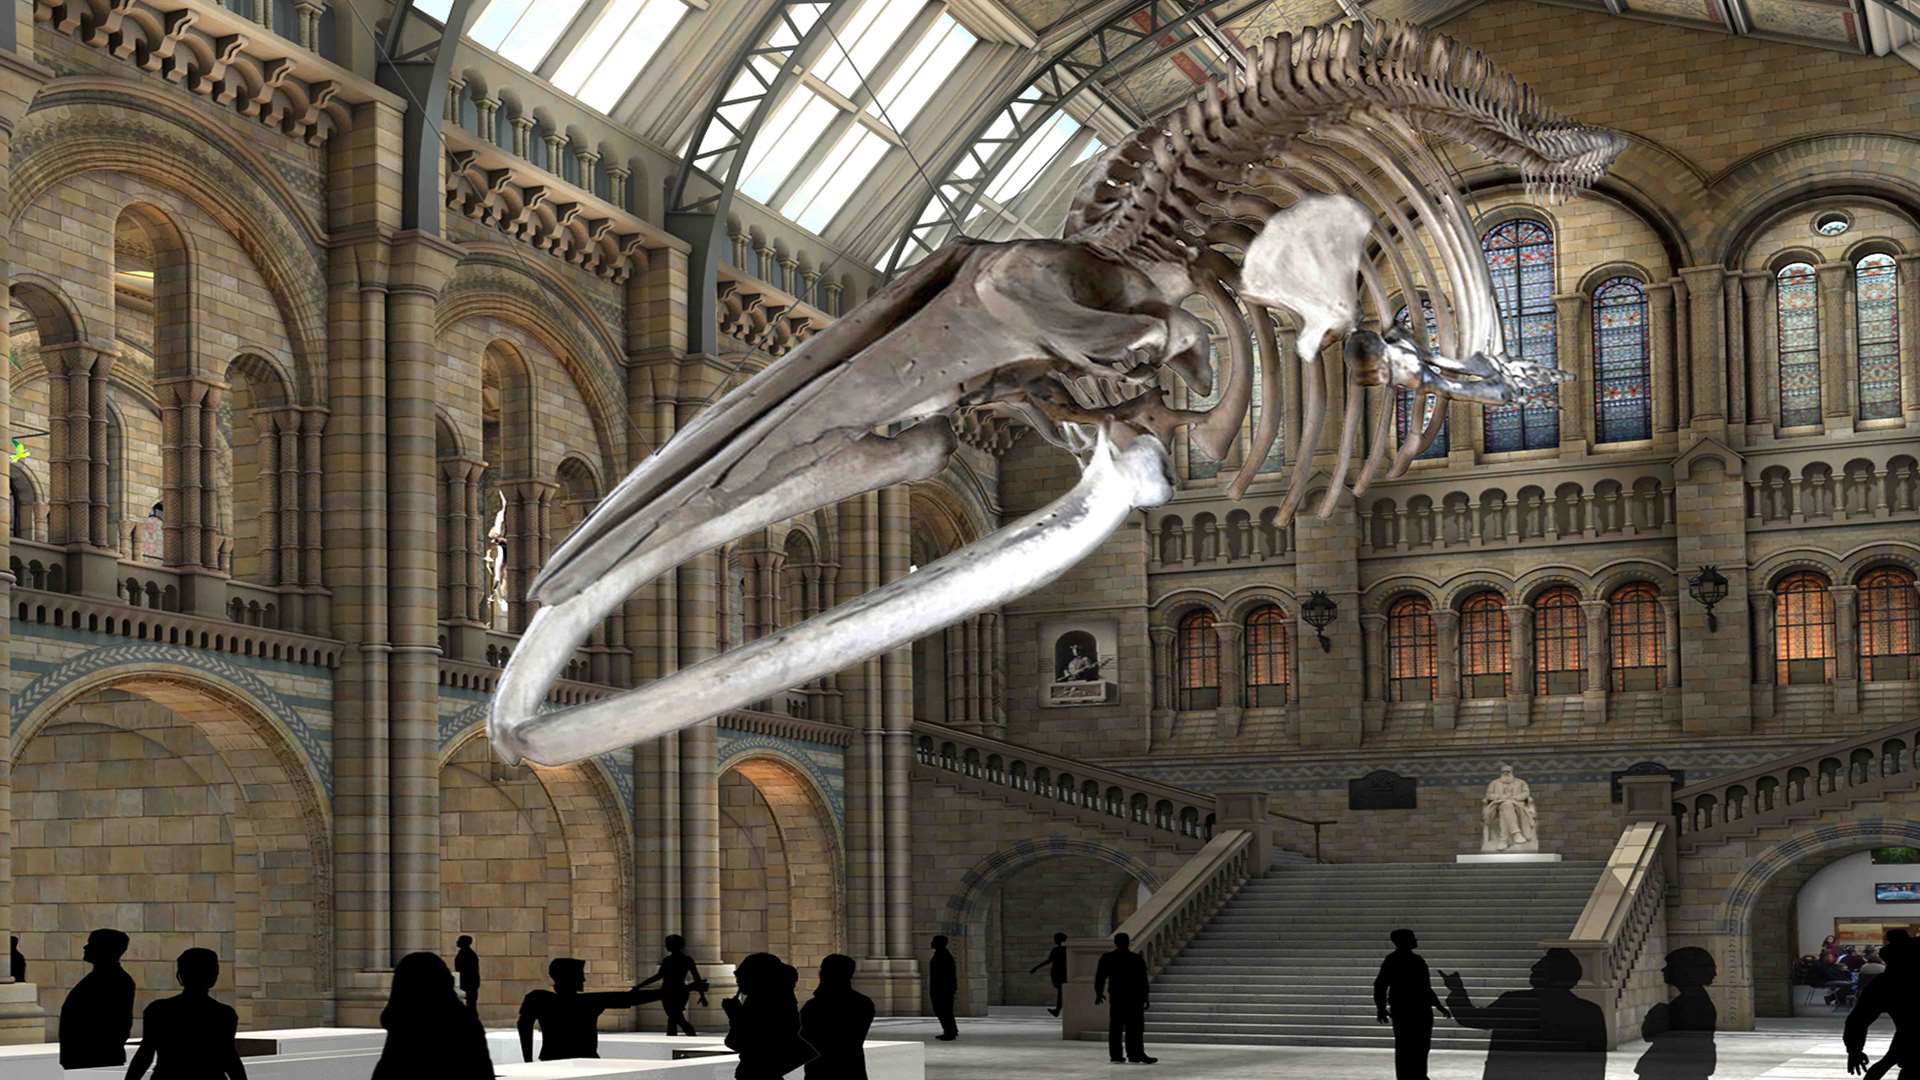 The whale will be unveiled in the main hall next summer